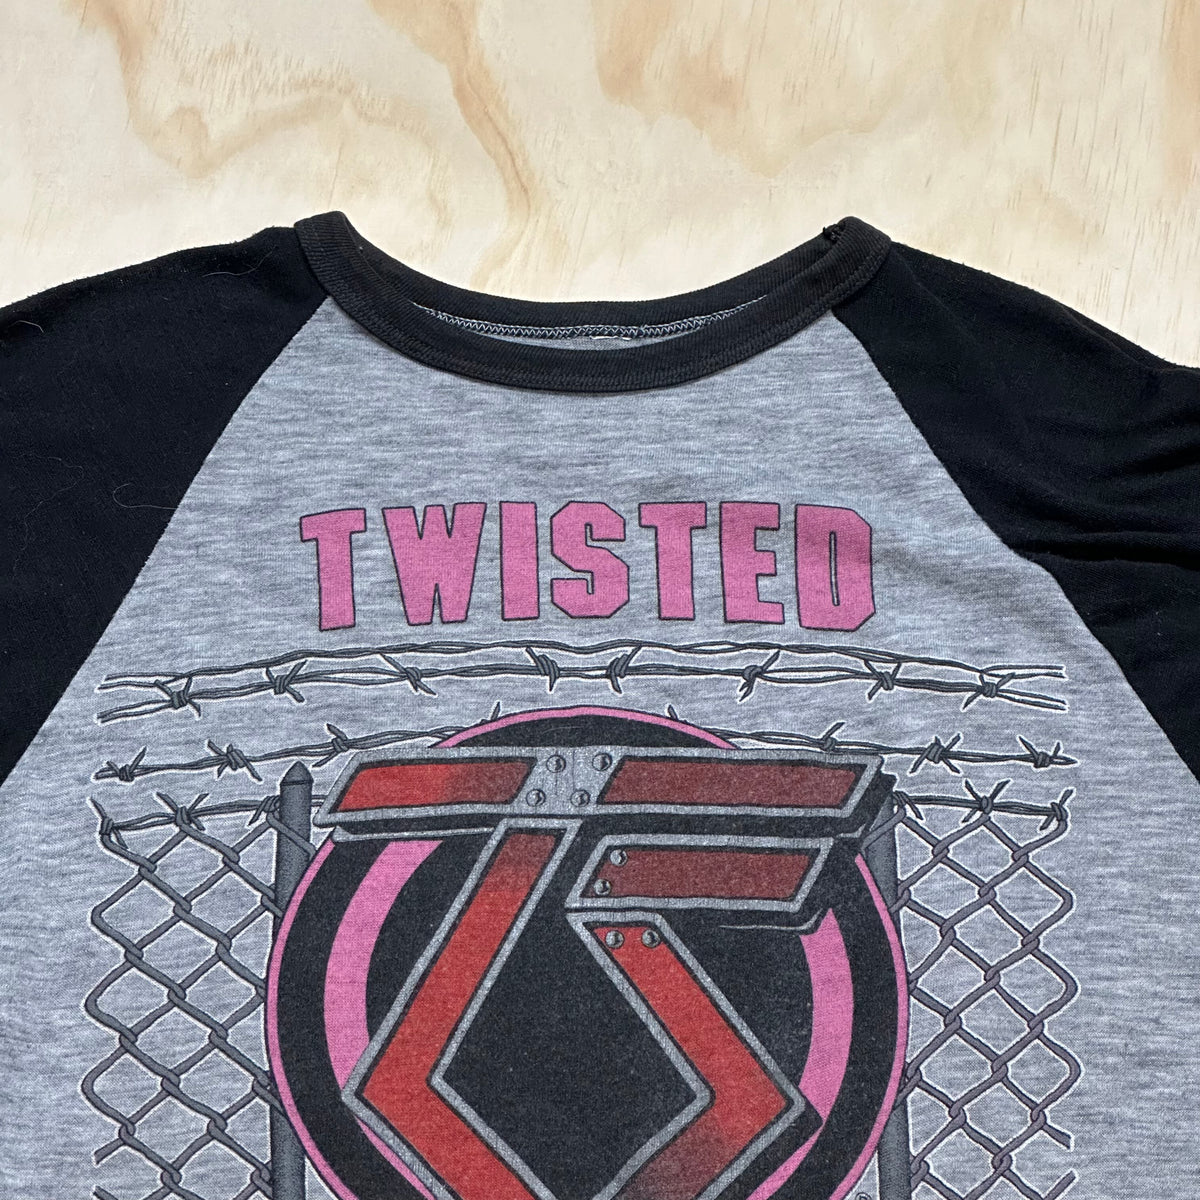 1983 Vintage Twisted Sister You Cant Stop Rock N Roll womens shirt